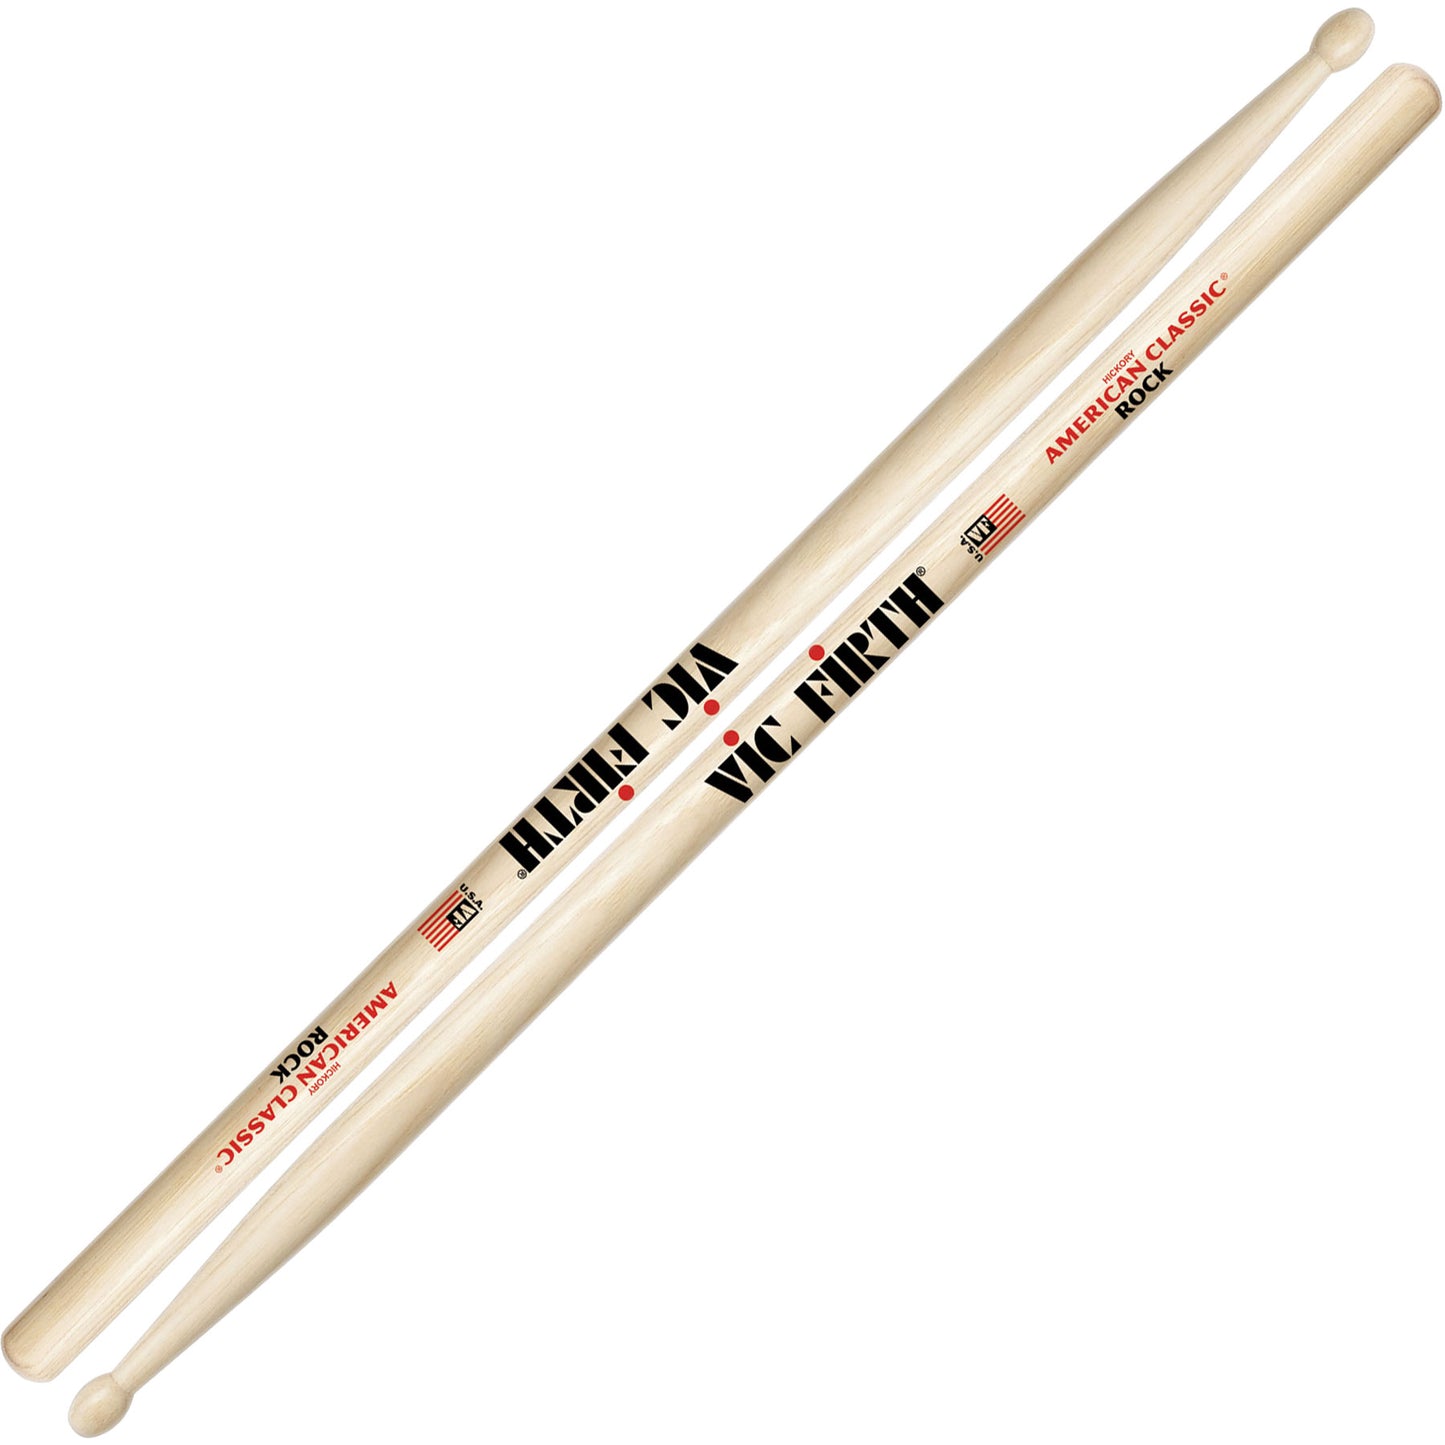 Vic Firth ROCKN American Classic Hickory Wood Oval Tip Rock Drumsticks (Pair) Drum Sticks for Drums and Percussion (Wood, Nylon Tip)